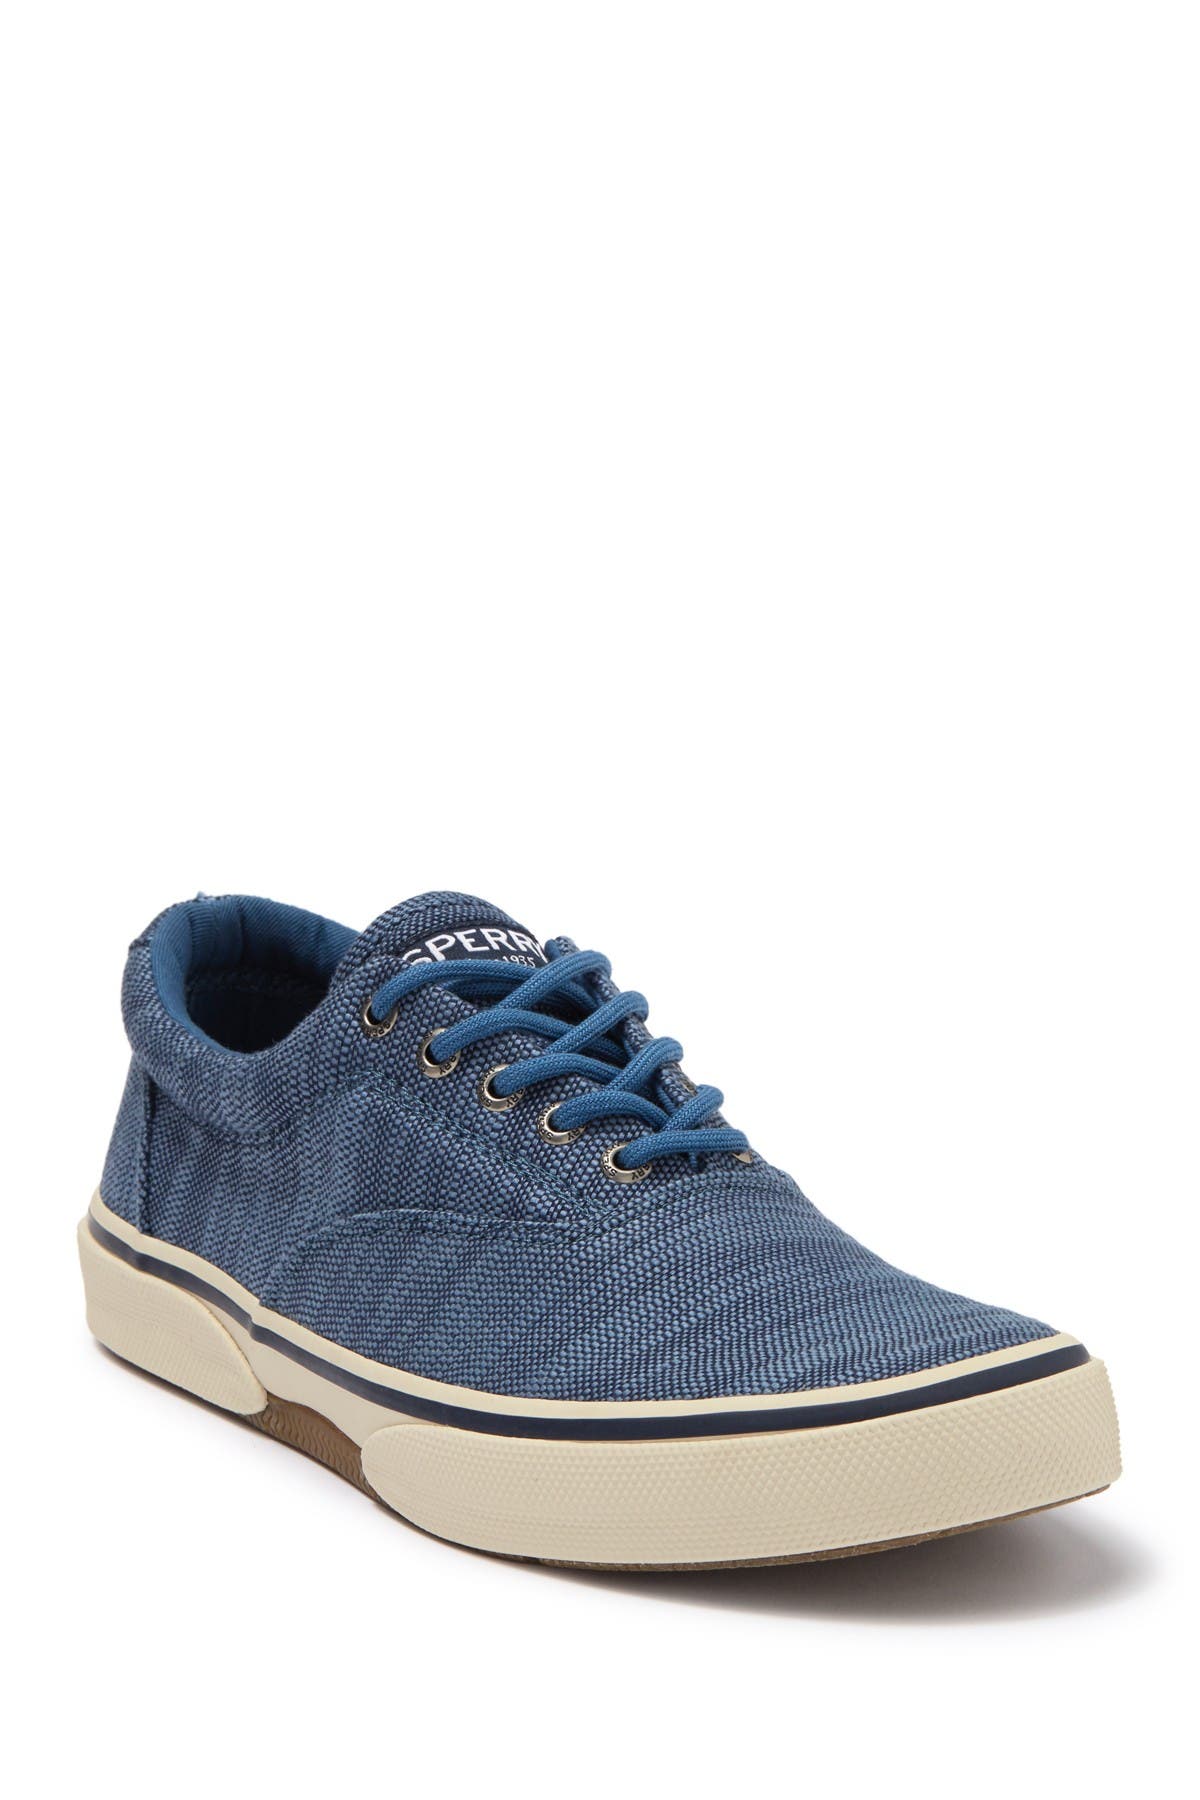 Sperry | Halyard CVO Lace-Up Sneaker 